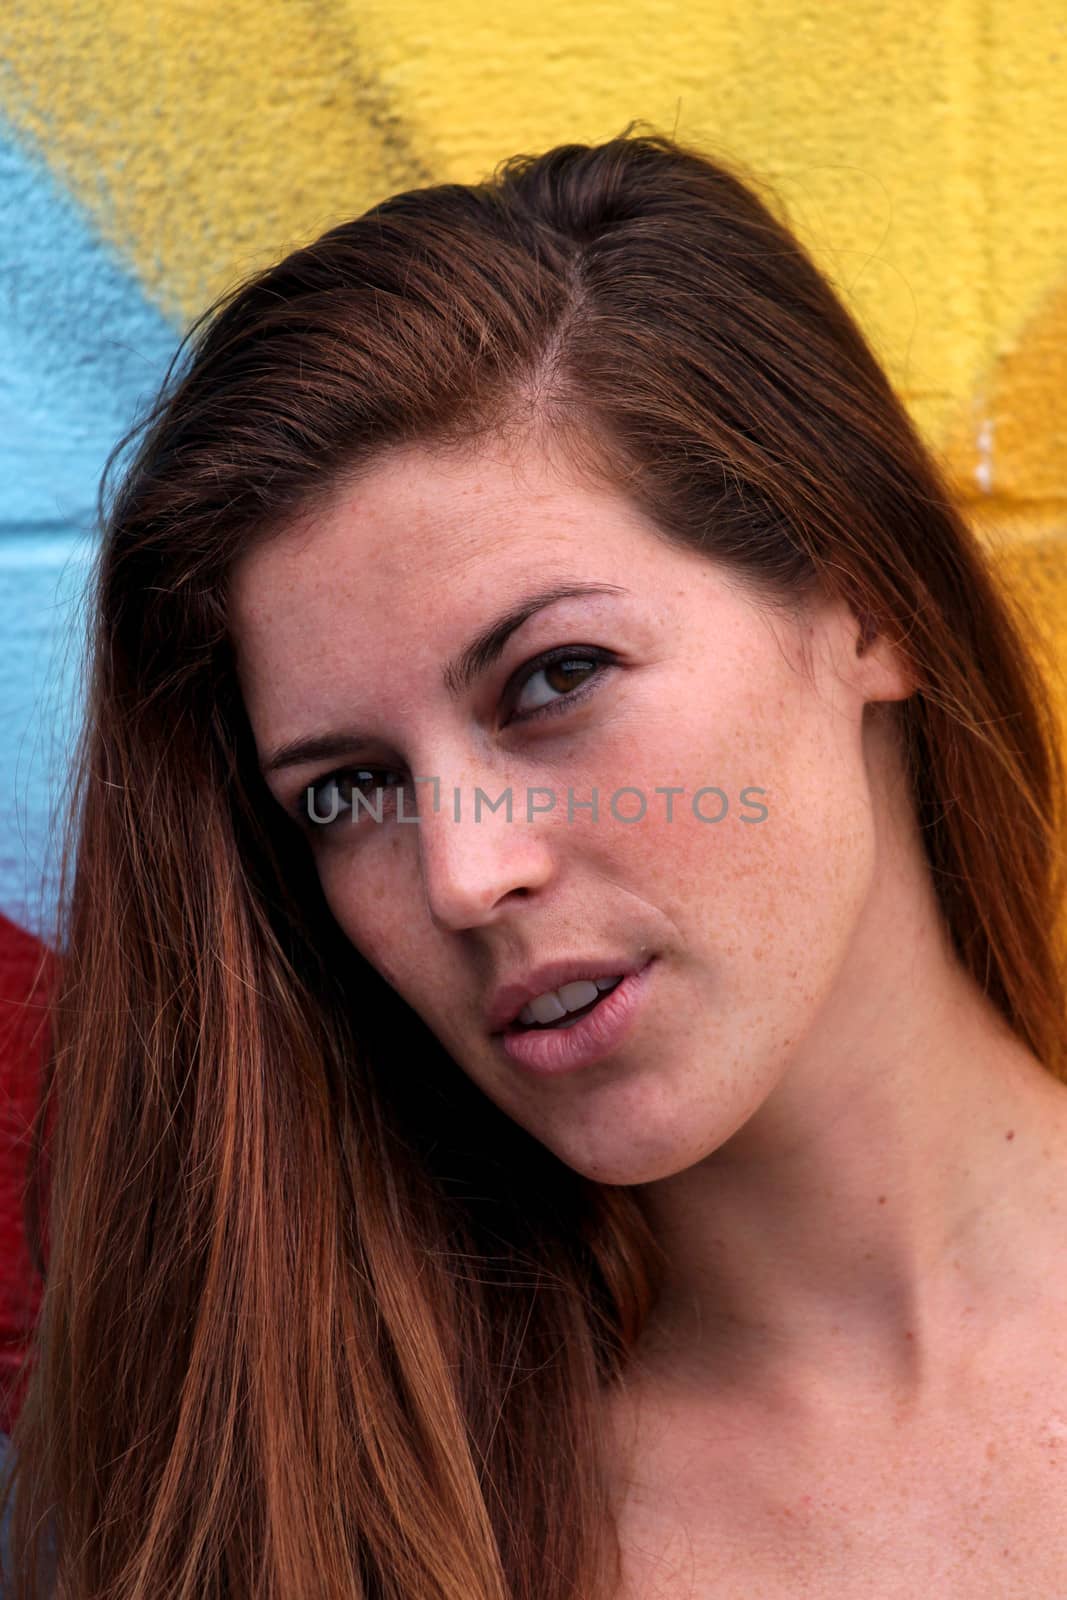 Young WomanYoung woman standing in front of a colorful background.